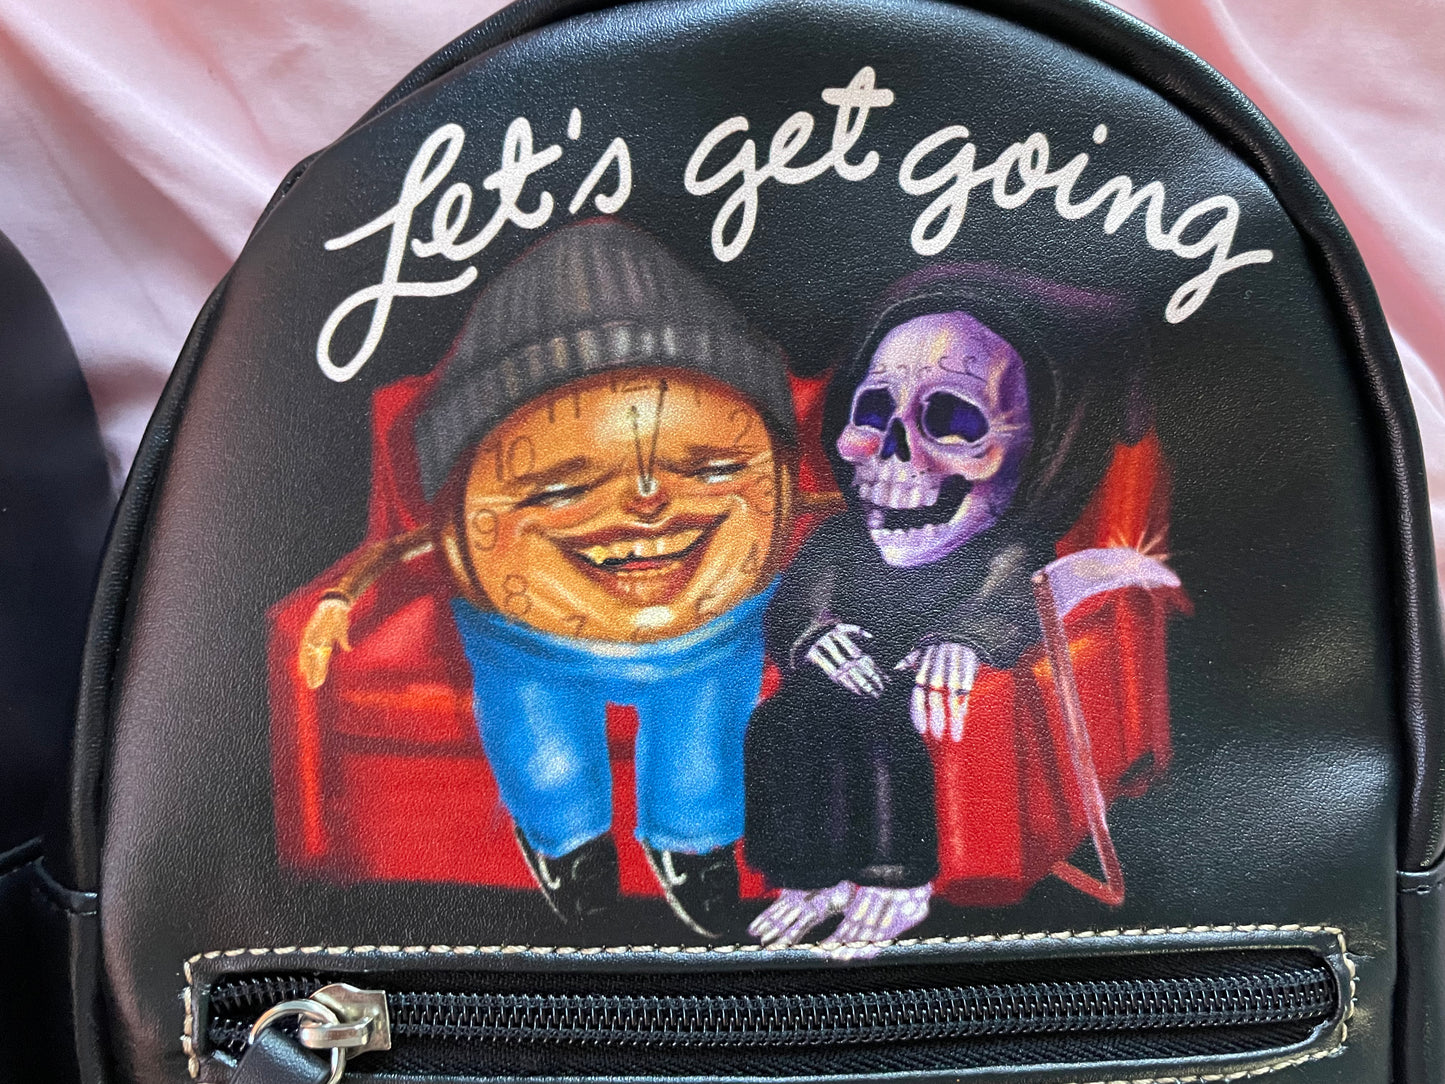 Let's get going while the going is good purse backpack